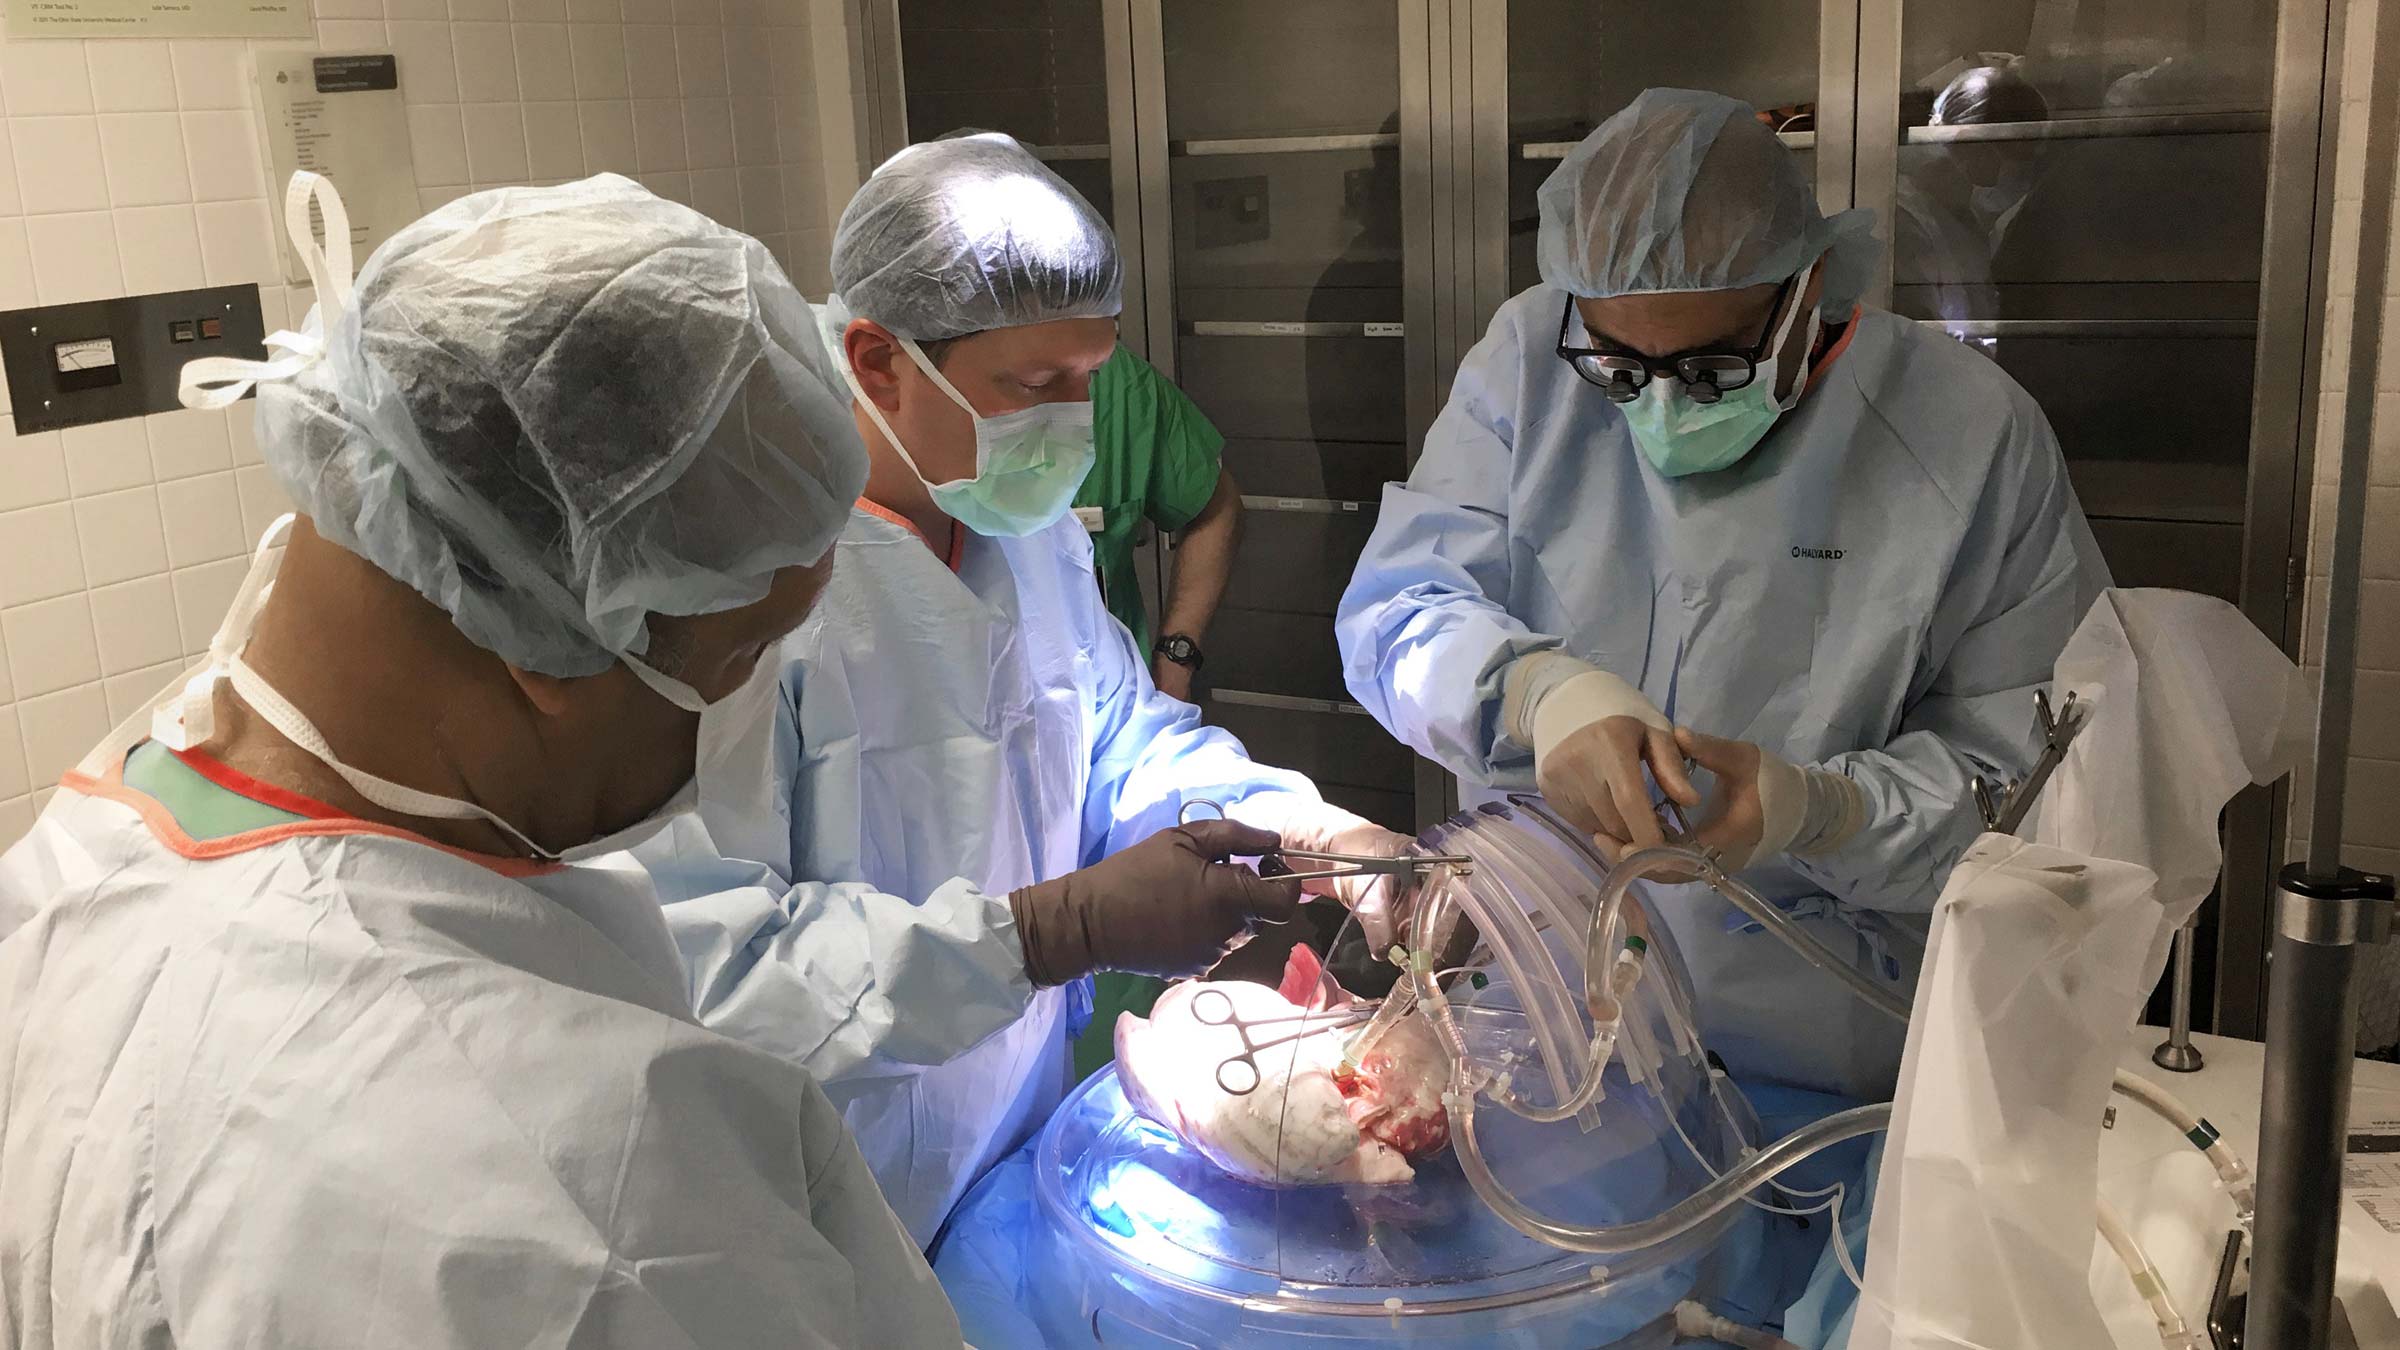 Dr. Whitson and his research team prepare a lung for the perfusion process.